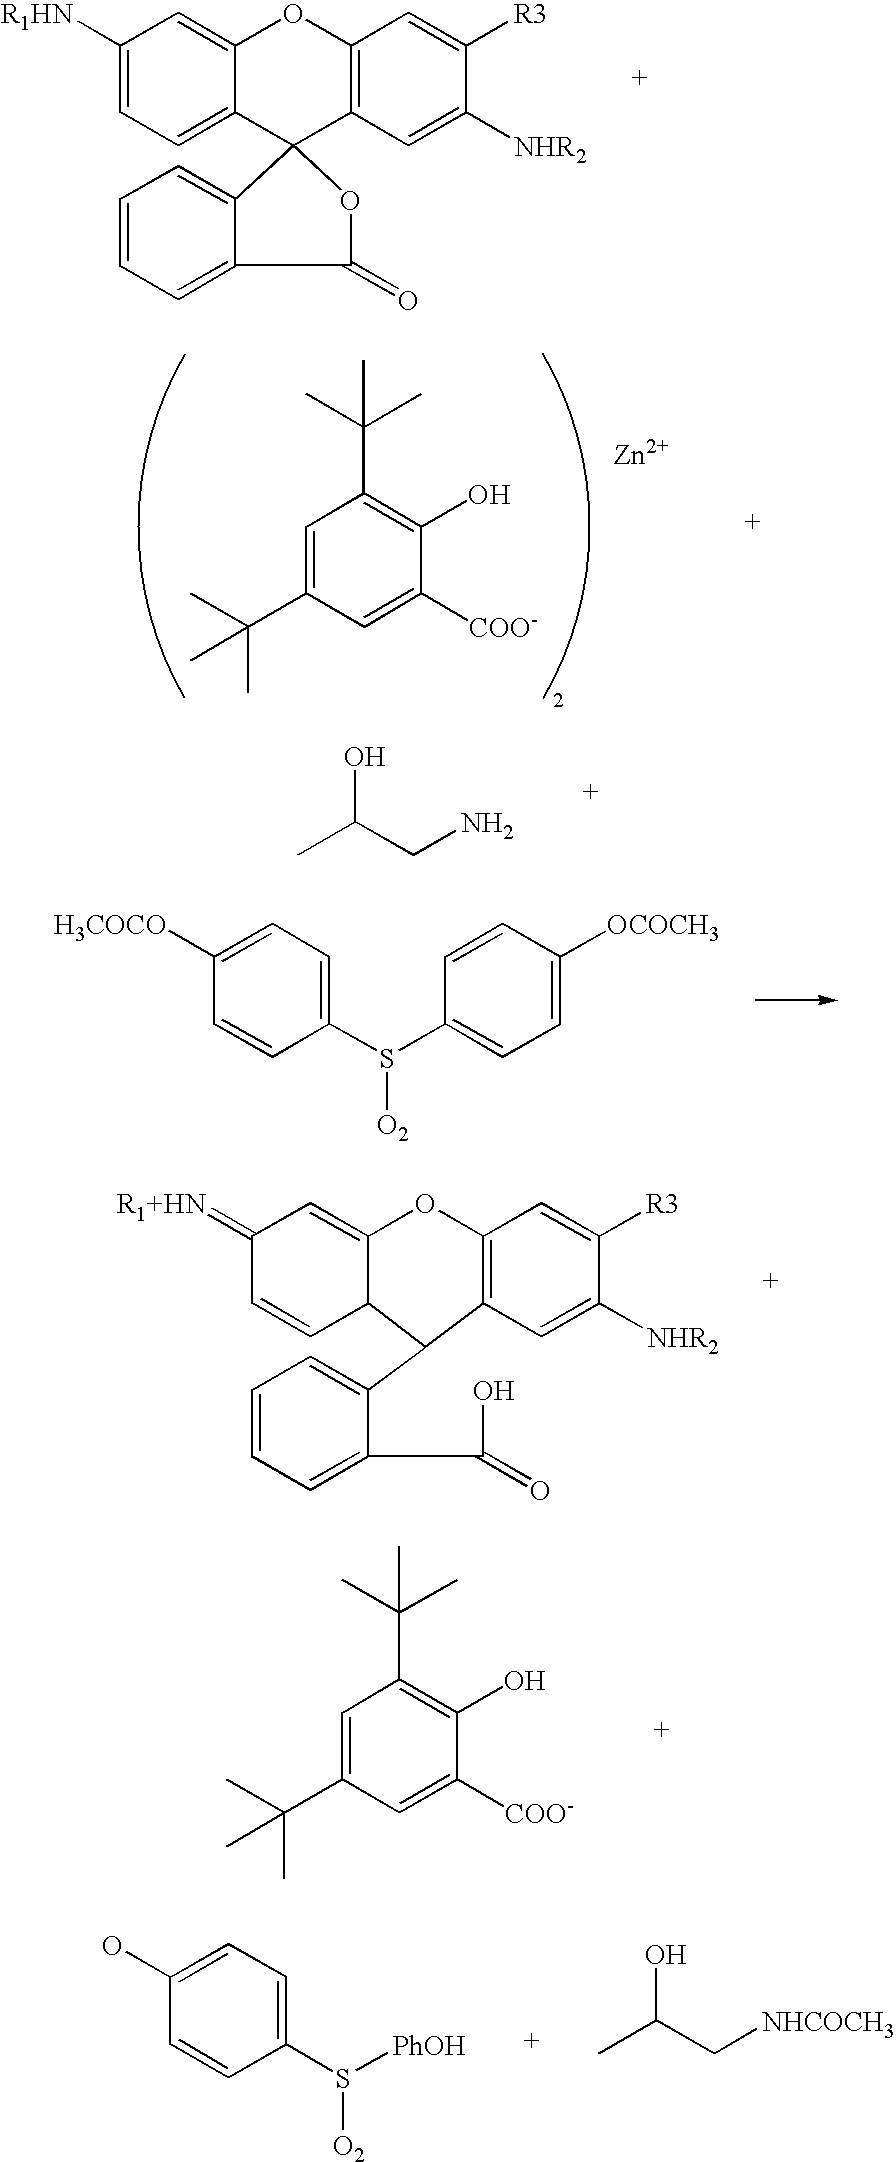 Metal salt activators for use in leuco dye compositions